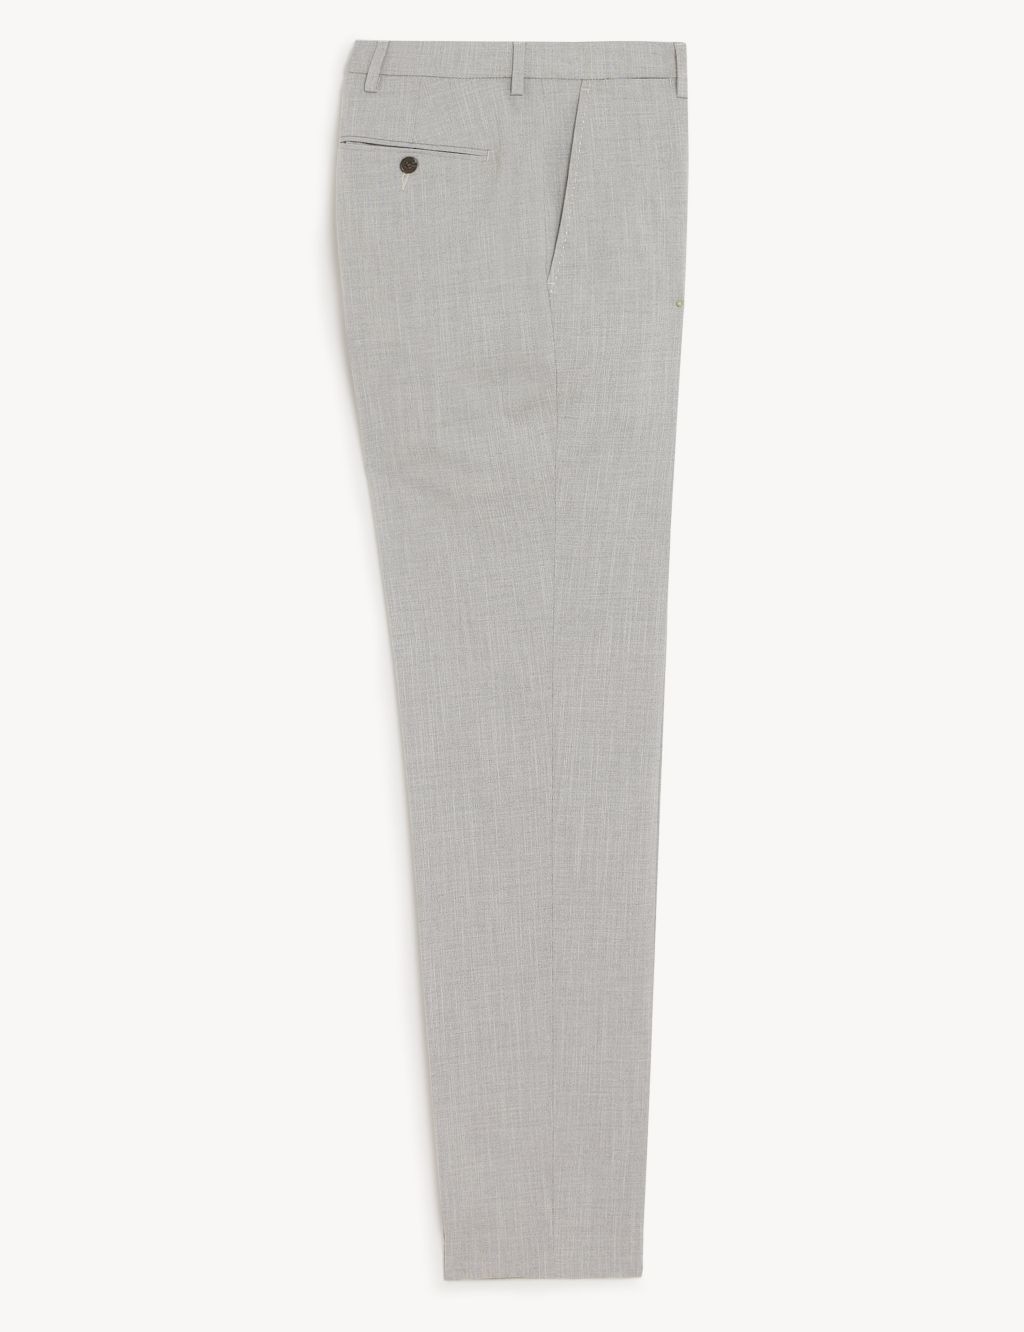 Textured Stretch Trousers image 2